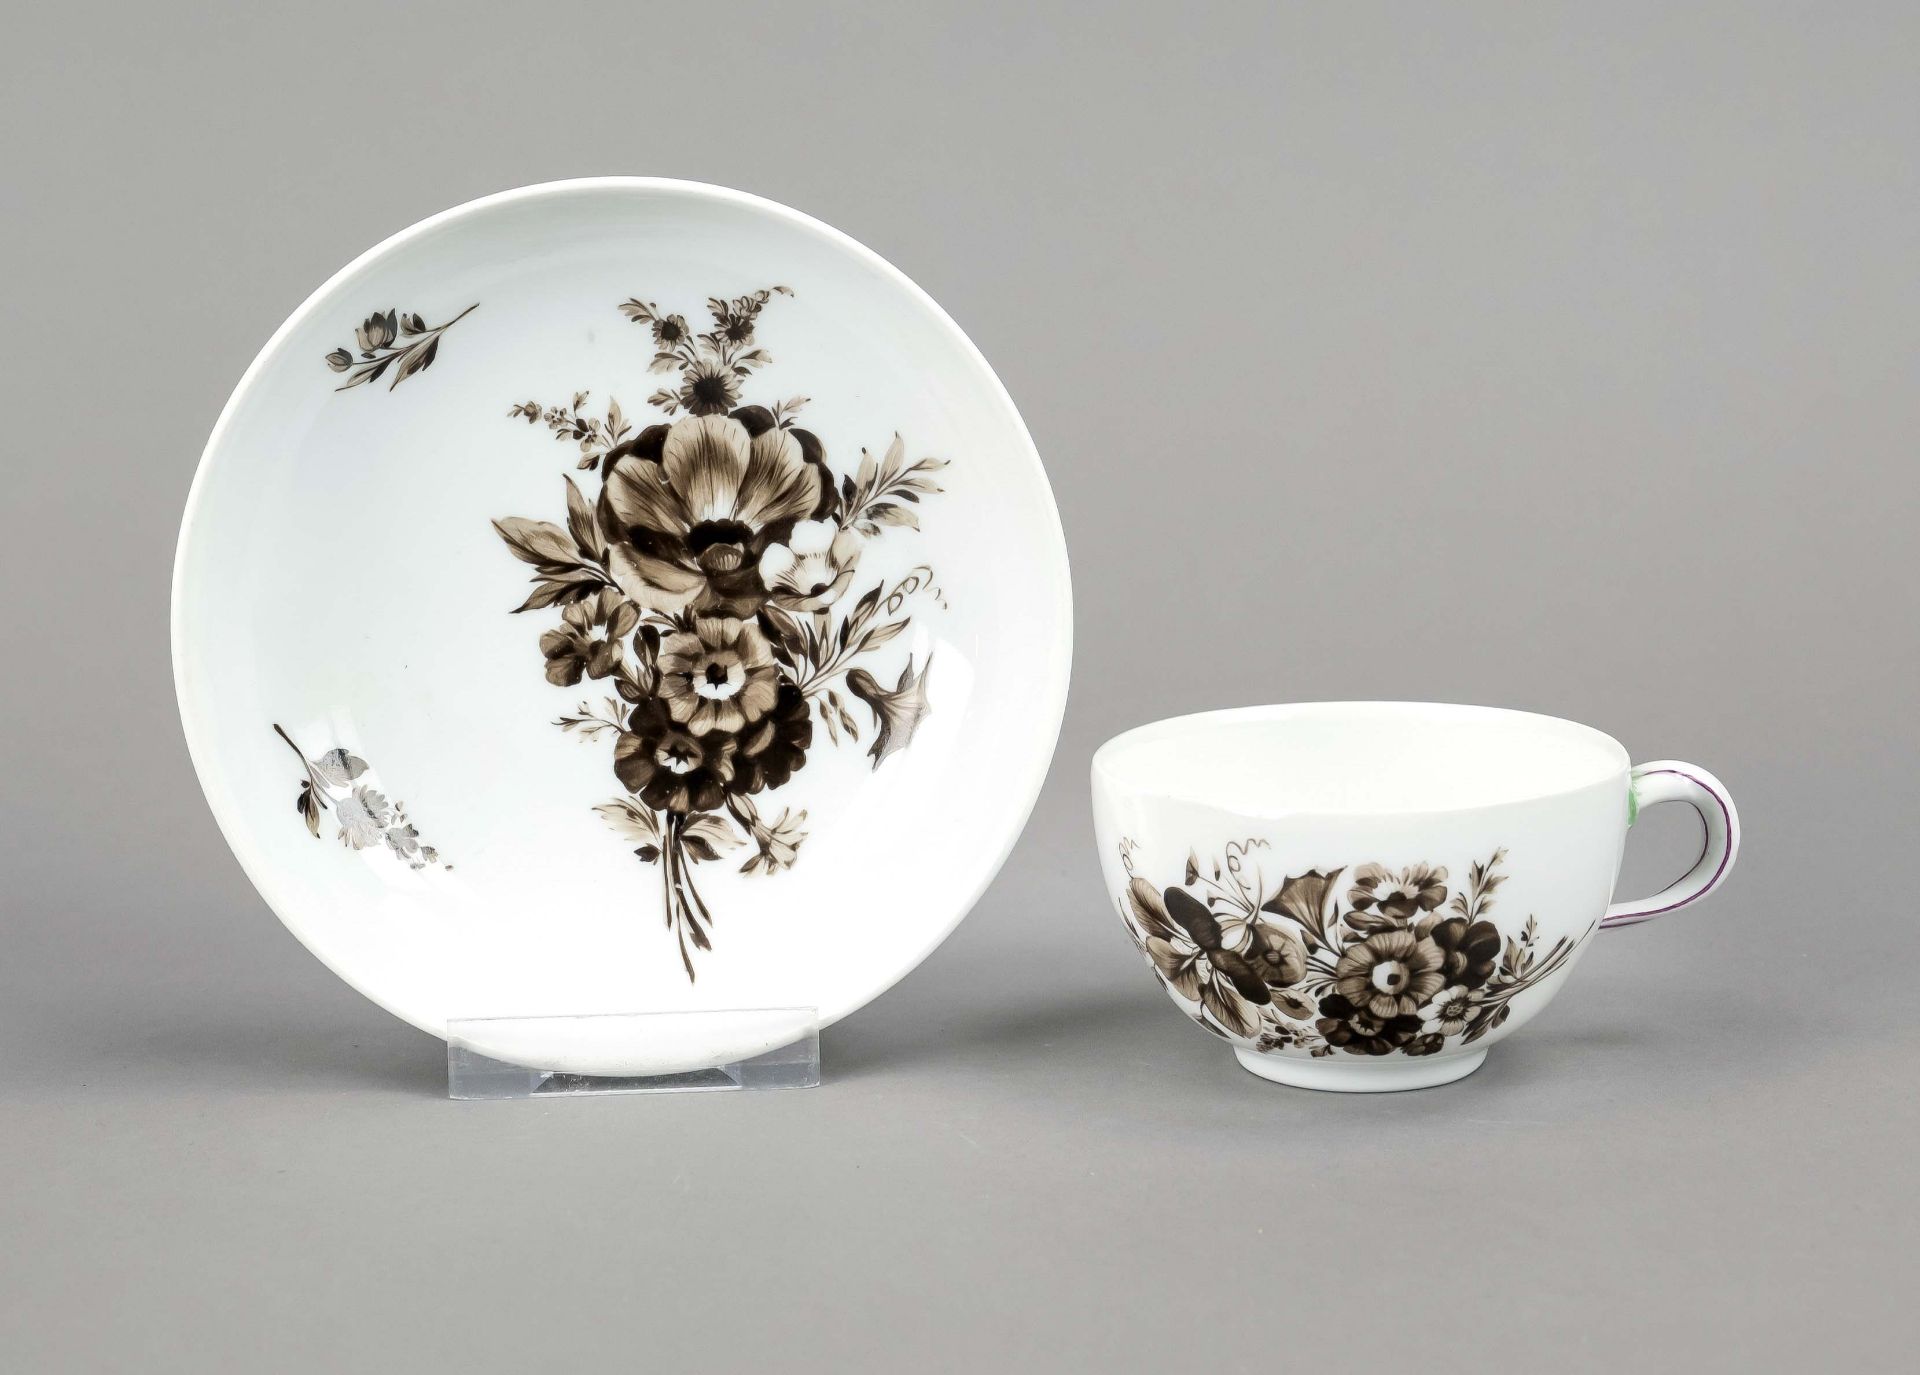 Tea cup and saucer, Meissen, Marcolini mark 1774-1817, spherical shape with double handle, rose